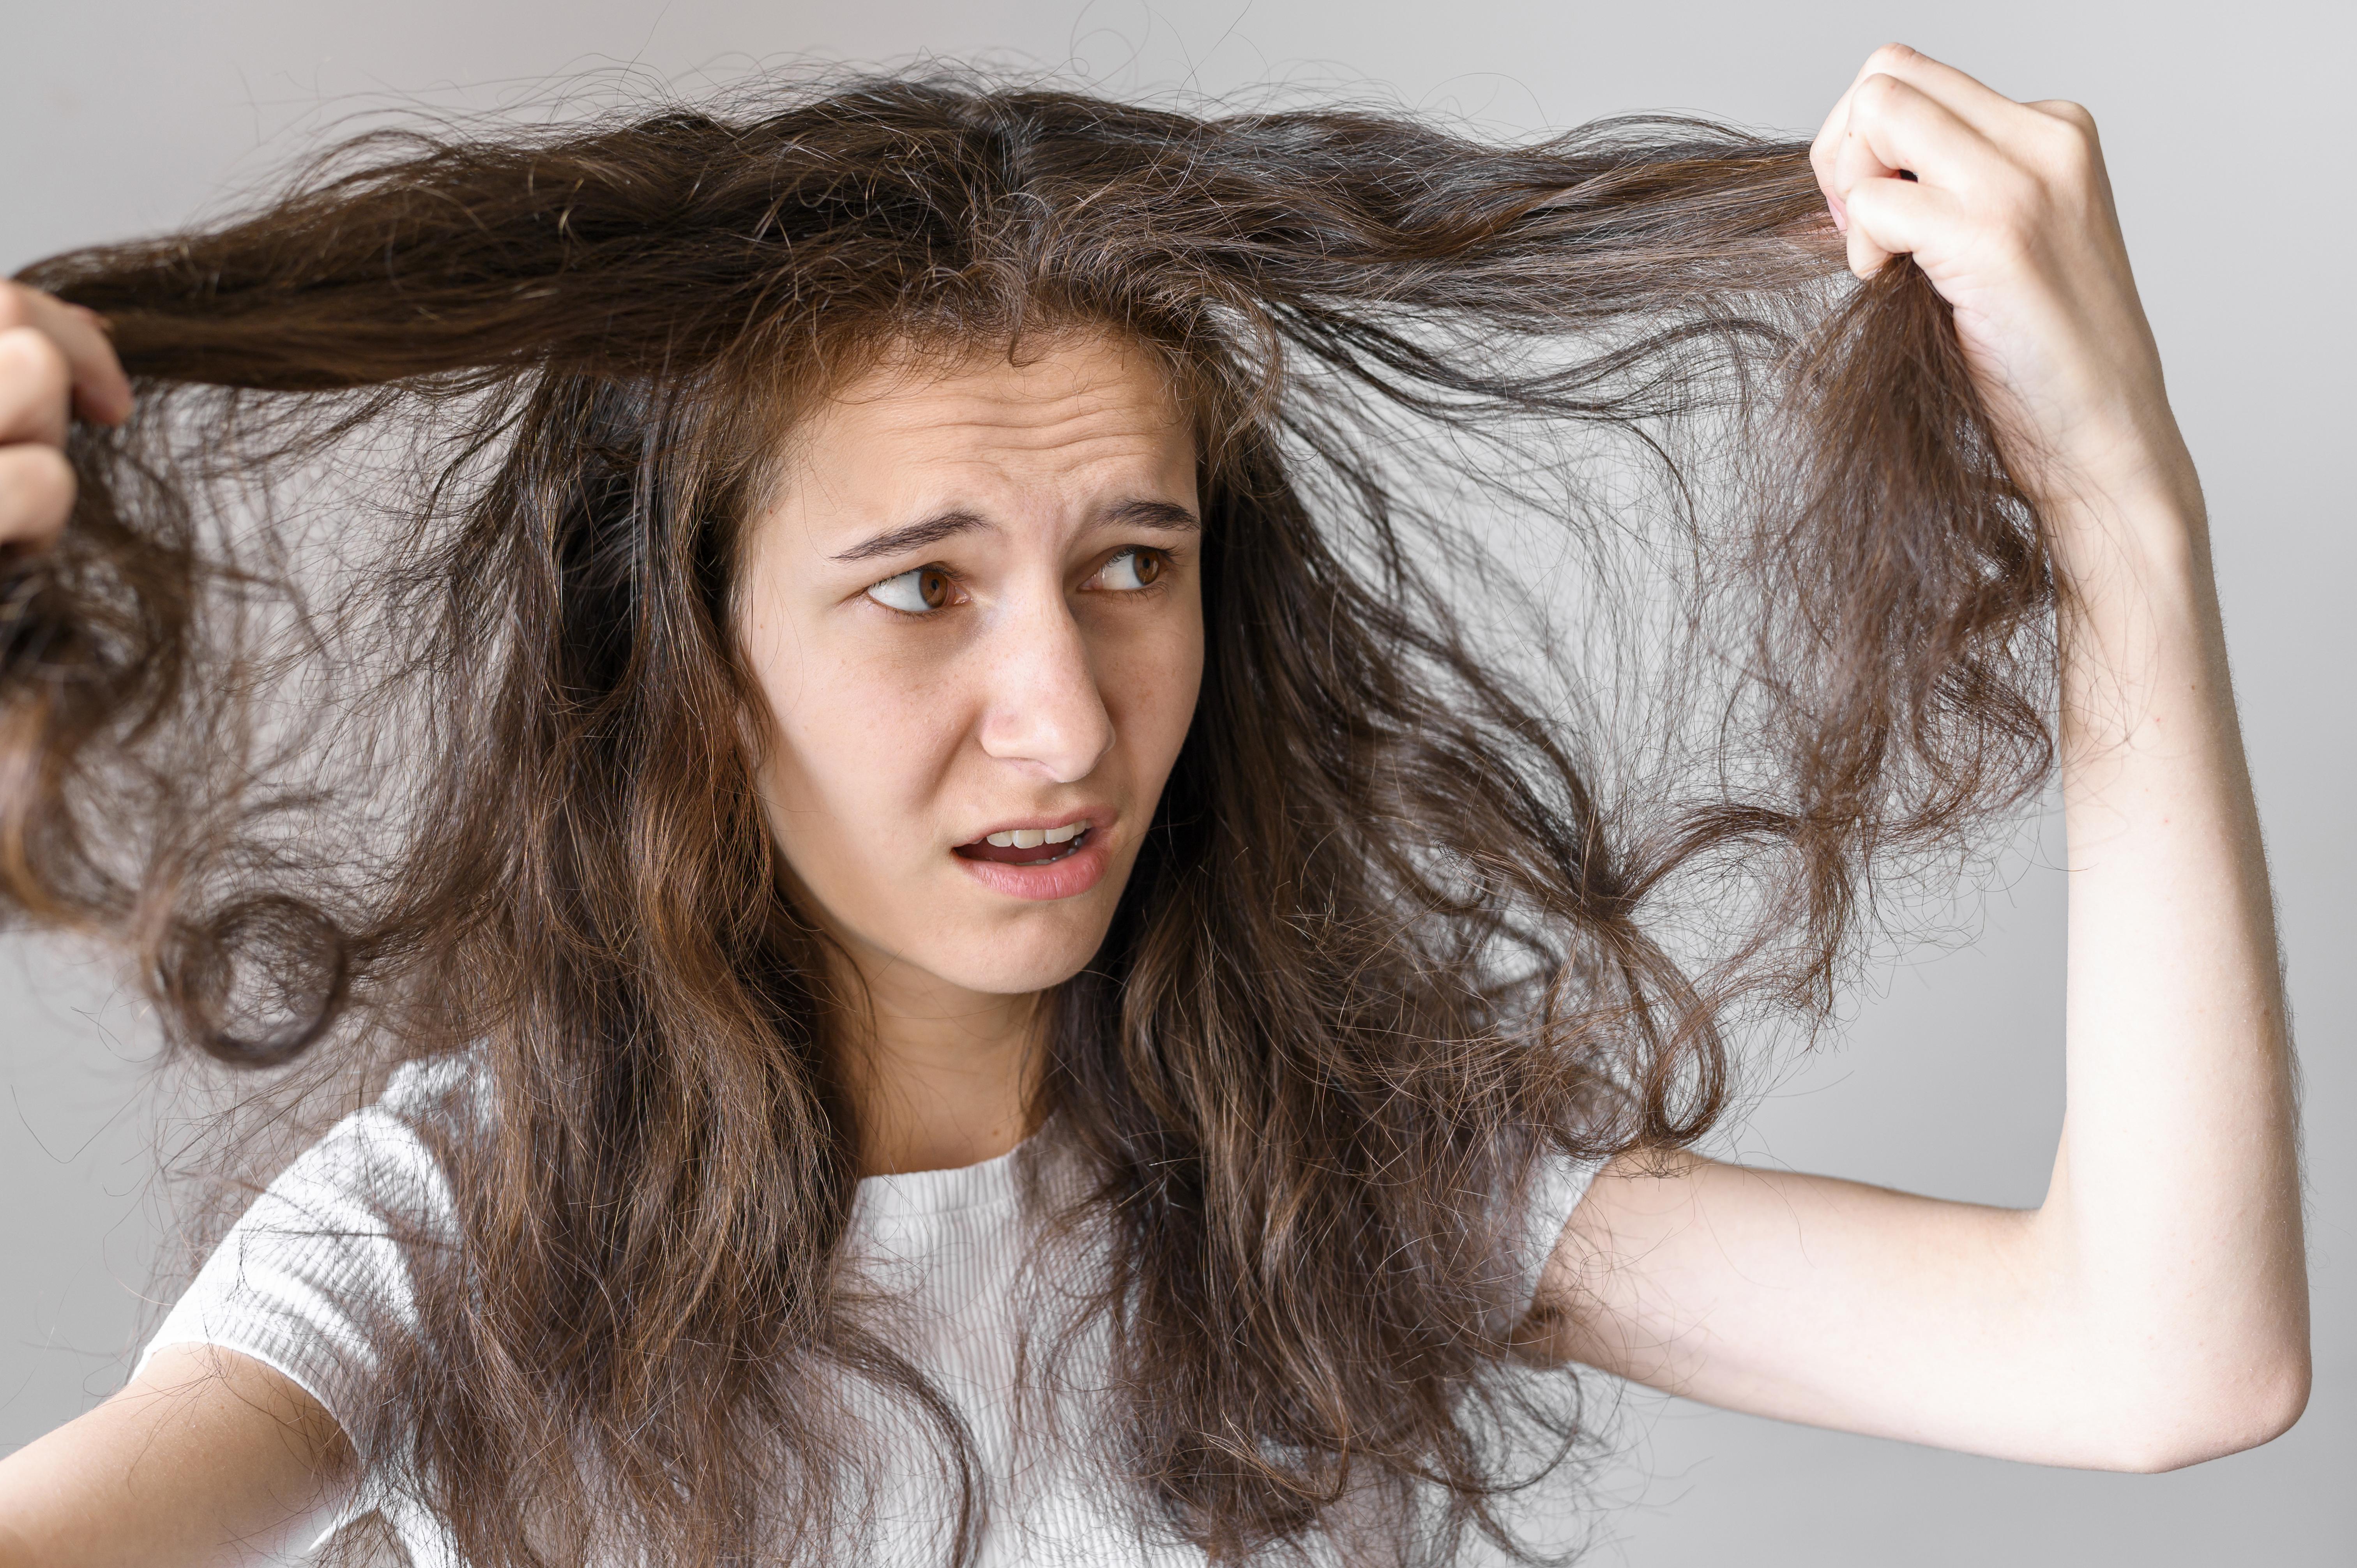 woman worried about tangled hair